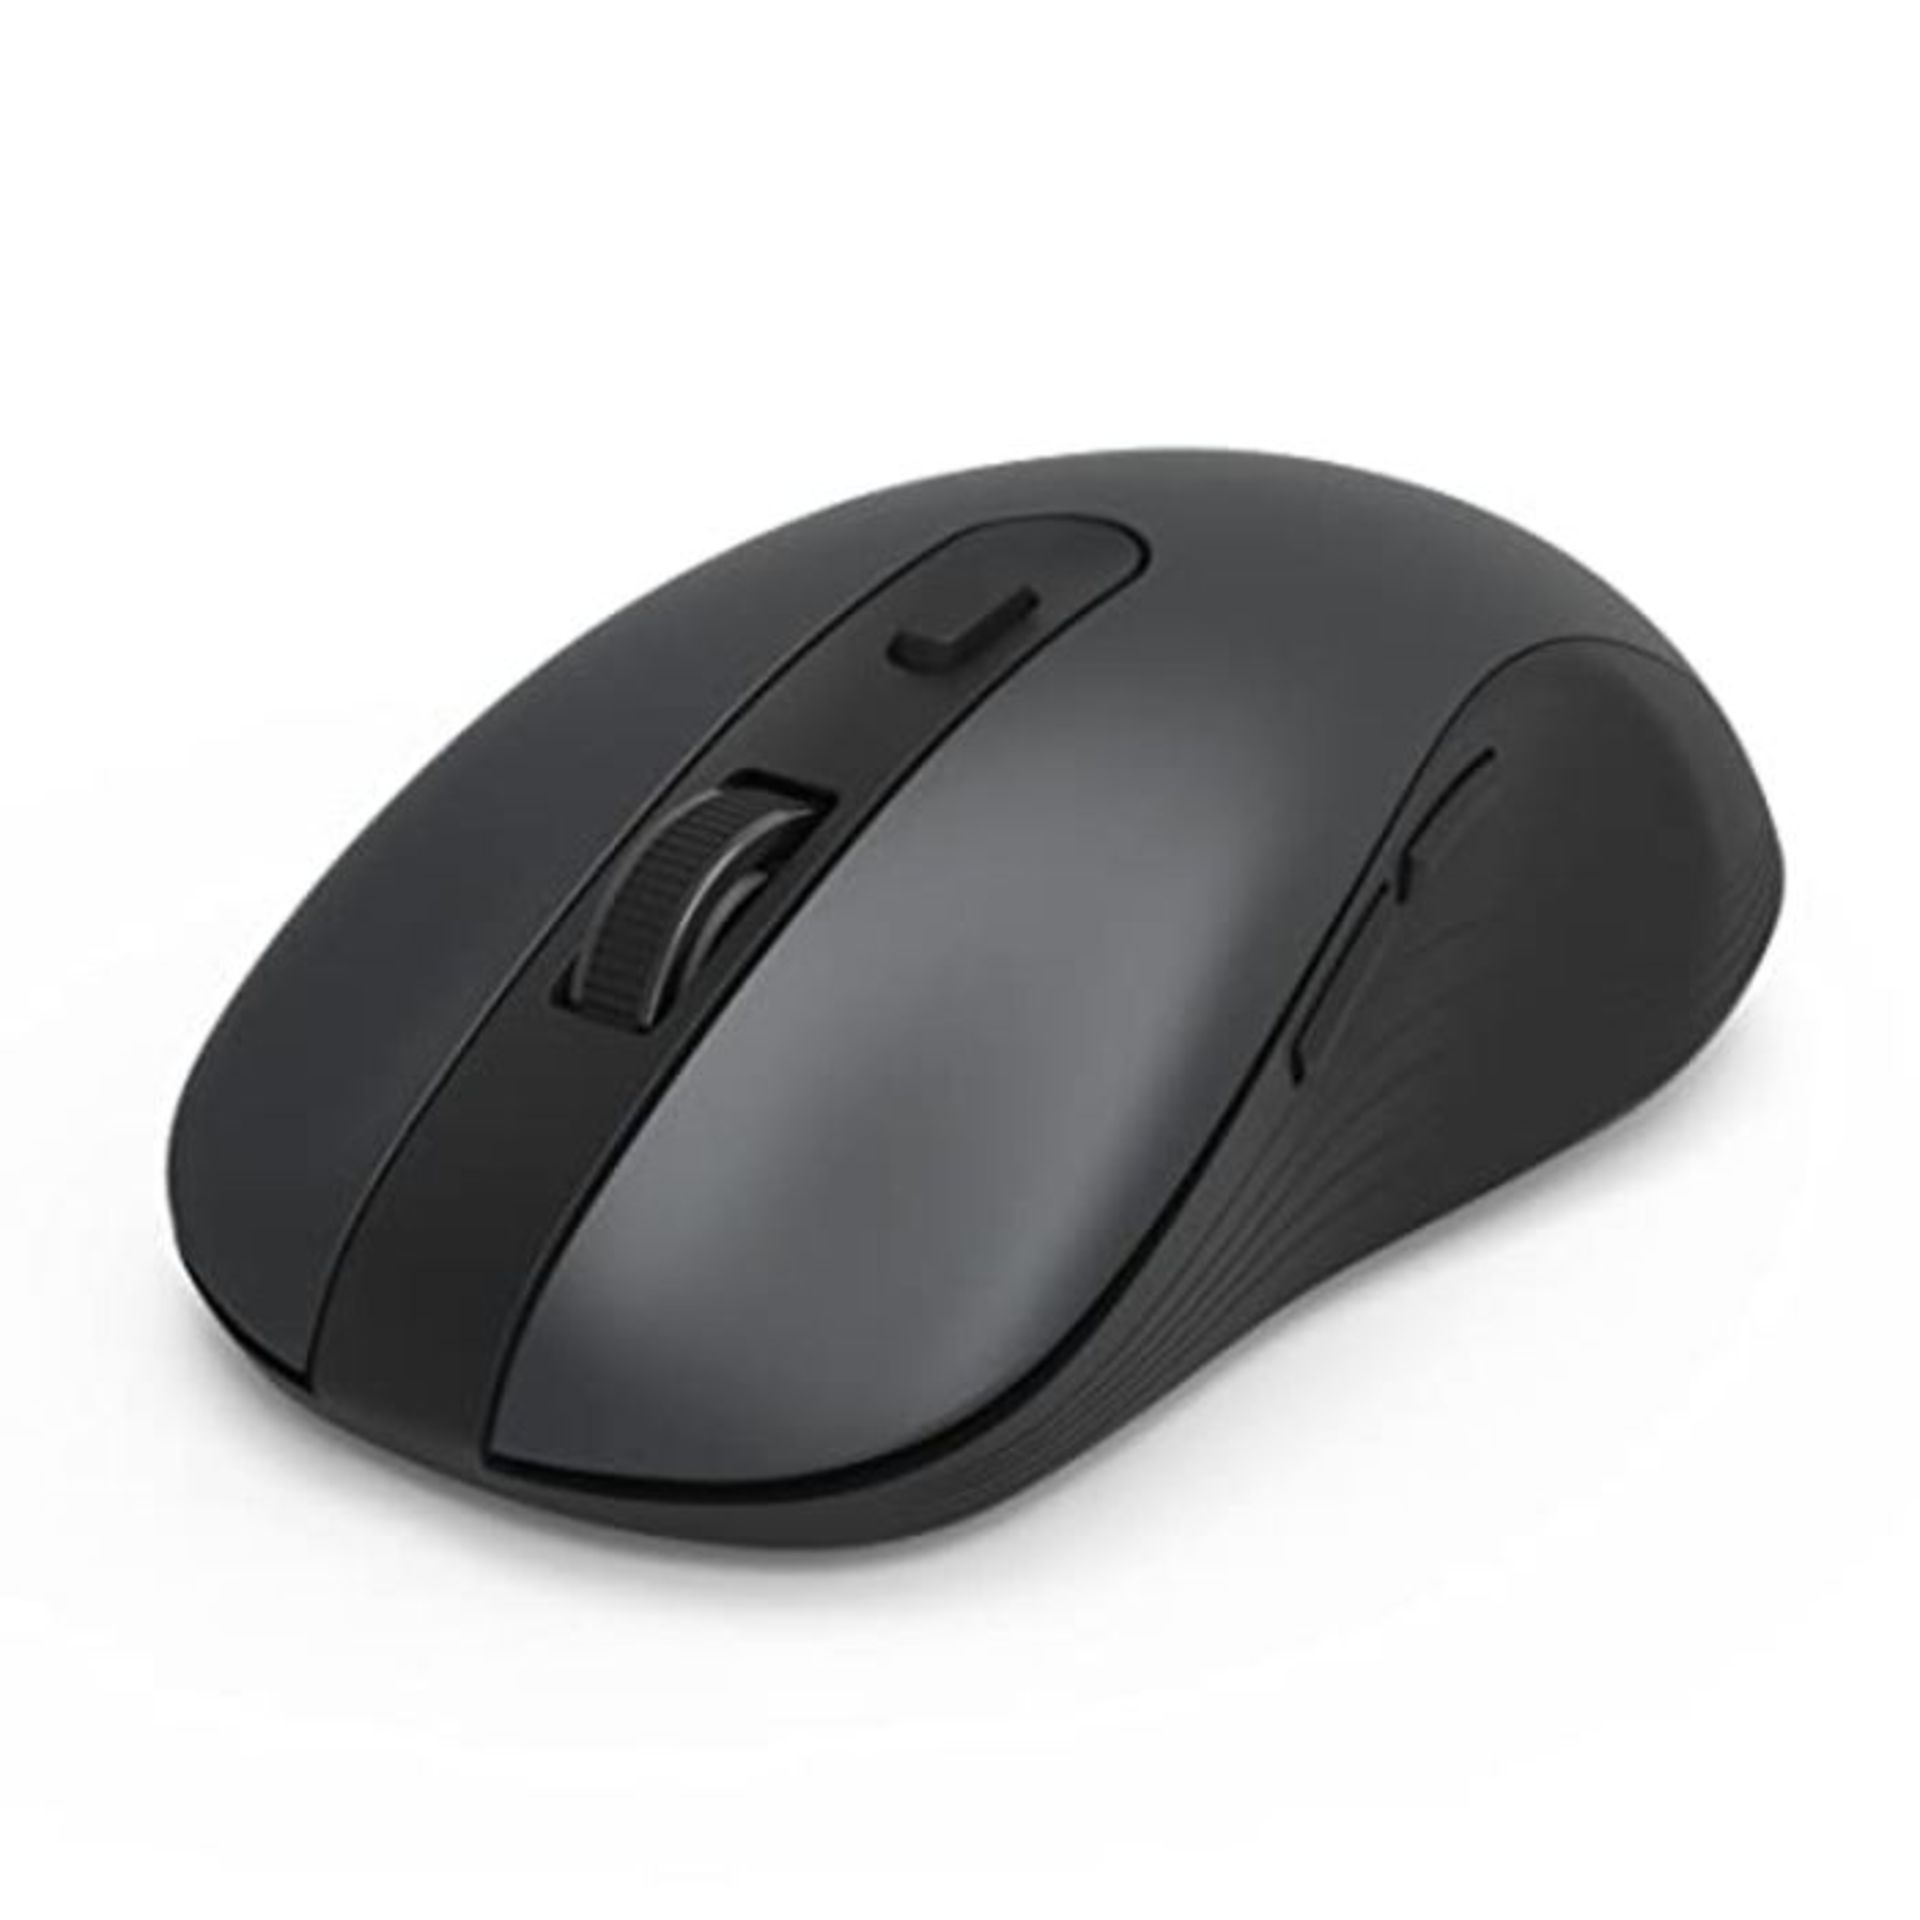 Hama Wireless Computer Mouse with 6 Buttons, Optical Mouse, Multi-Device Mouse for PC,